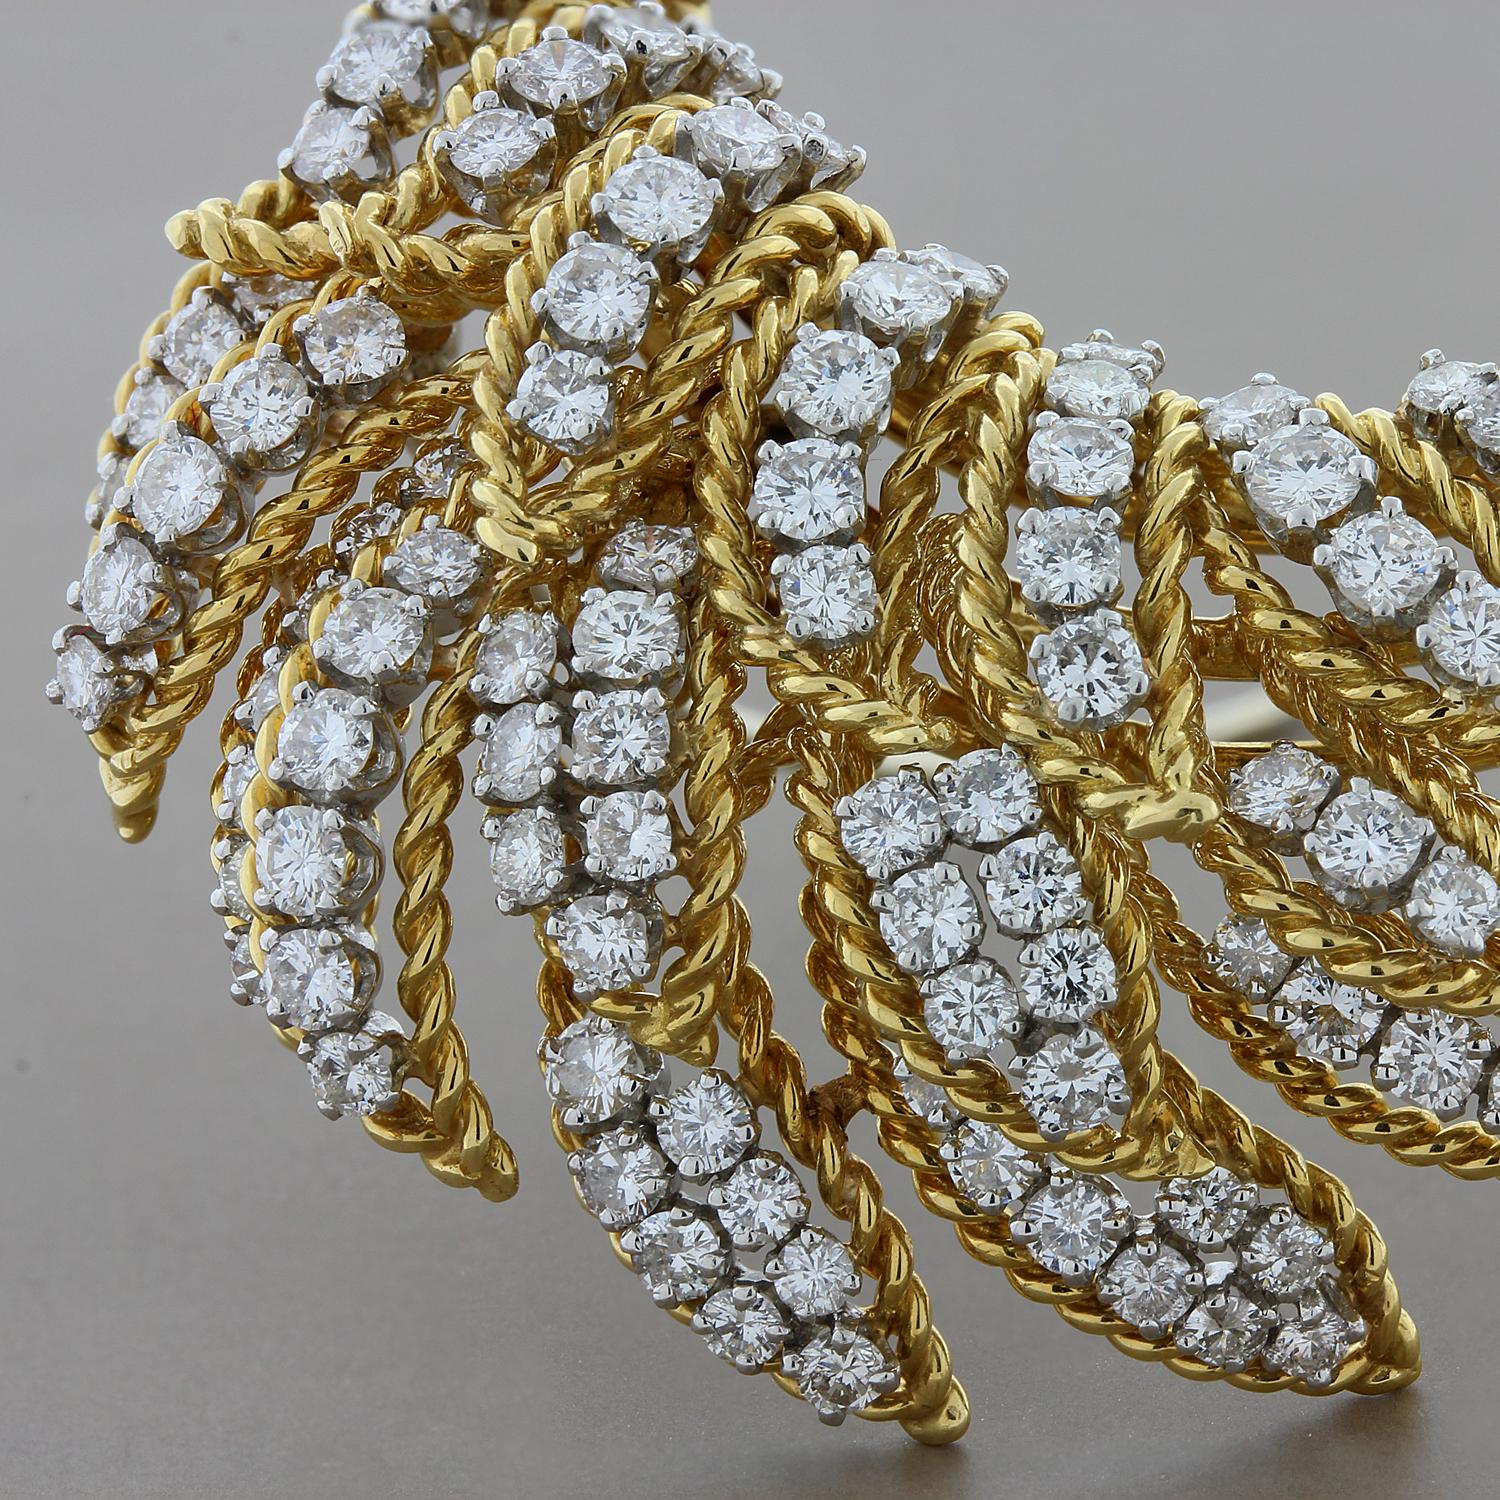 This classic brooch features 6.70 carats of VS quality round cut diamonds set in 18K white gold. The feathers are finely crafted 18K yellow gold with a twist design for added flare. The brooch has a hidden bail so that it may be worn as a pendant